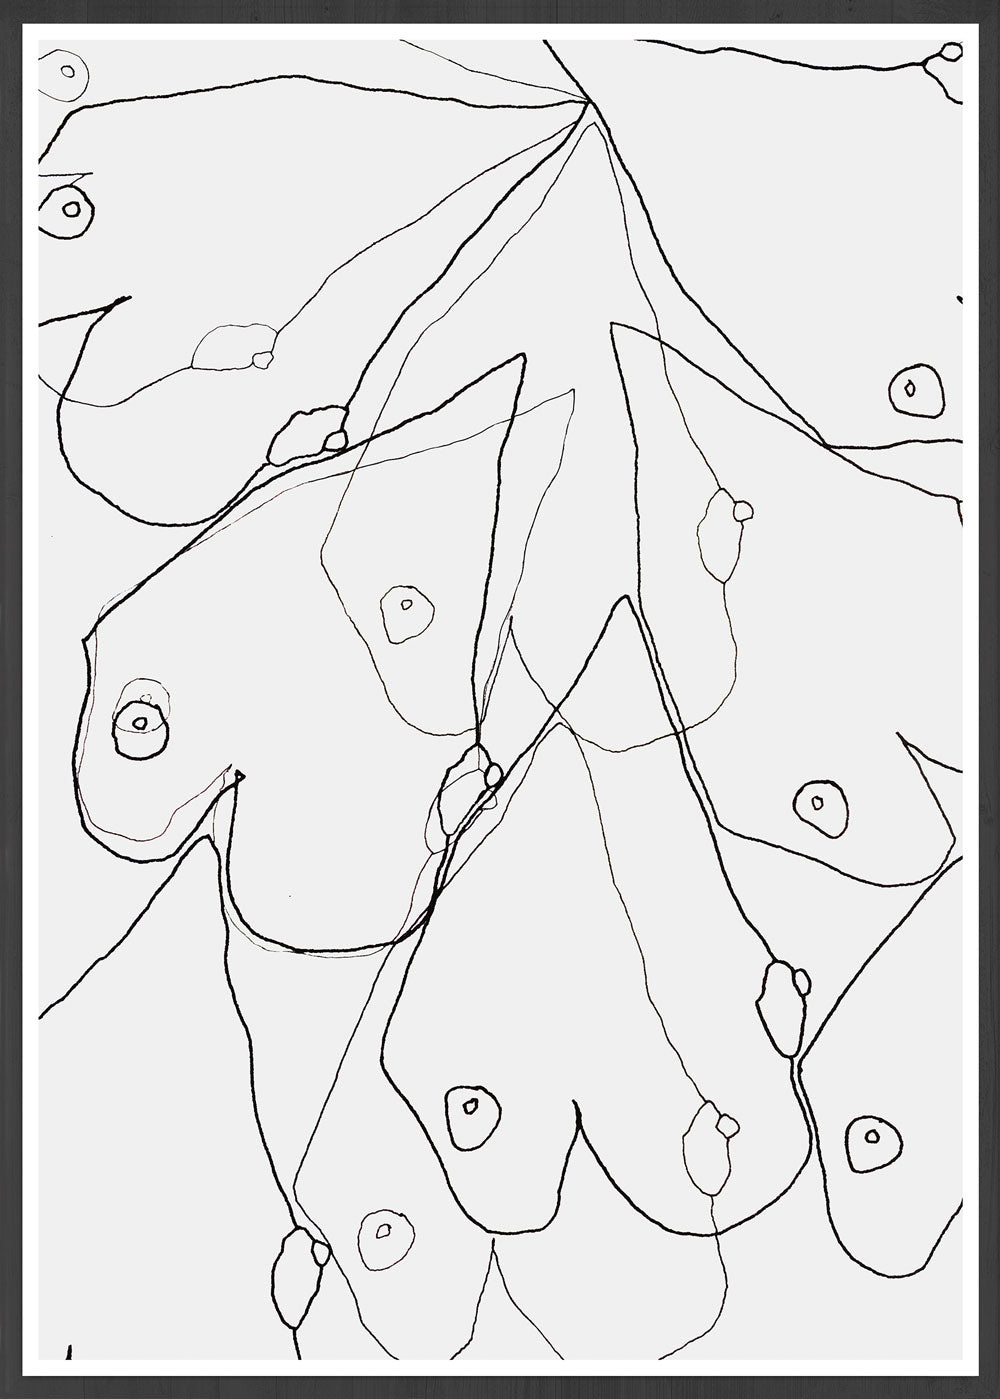 Tits Up BW Nude Abstract Illustration in a frame